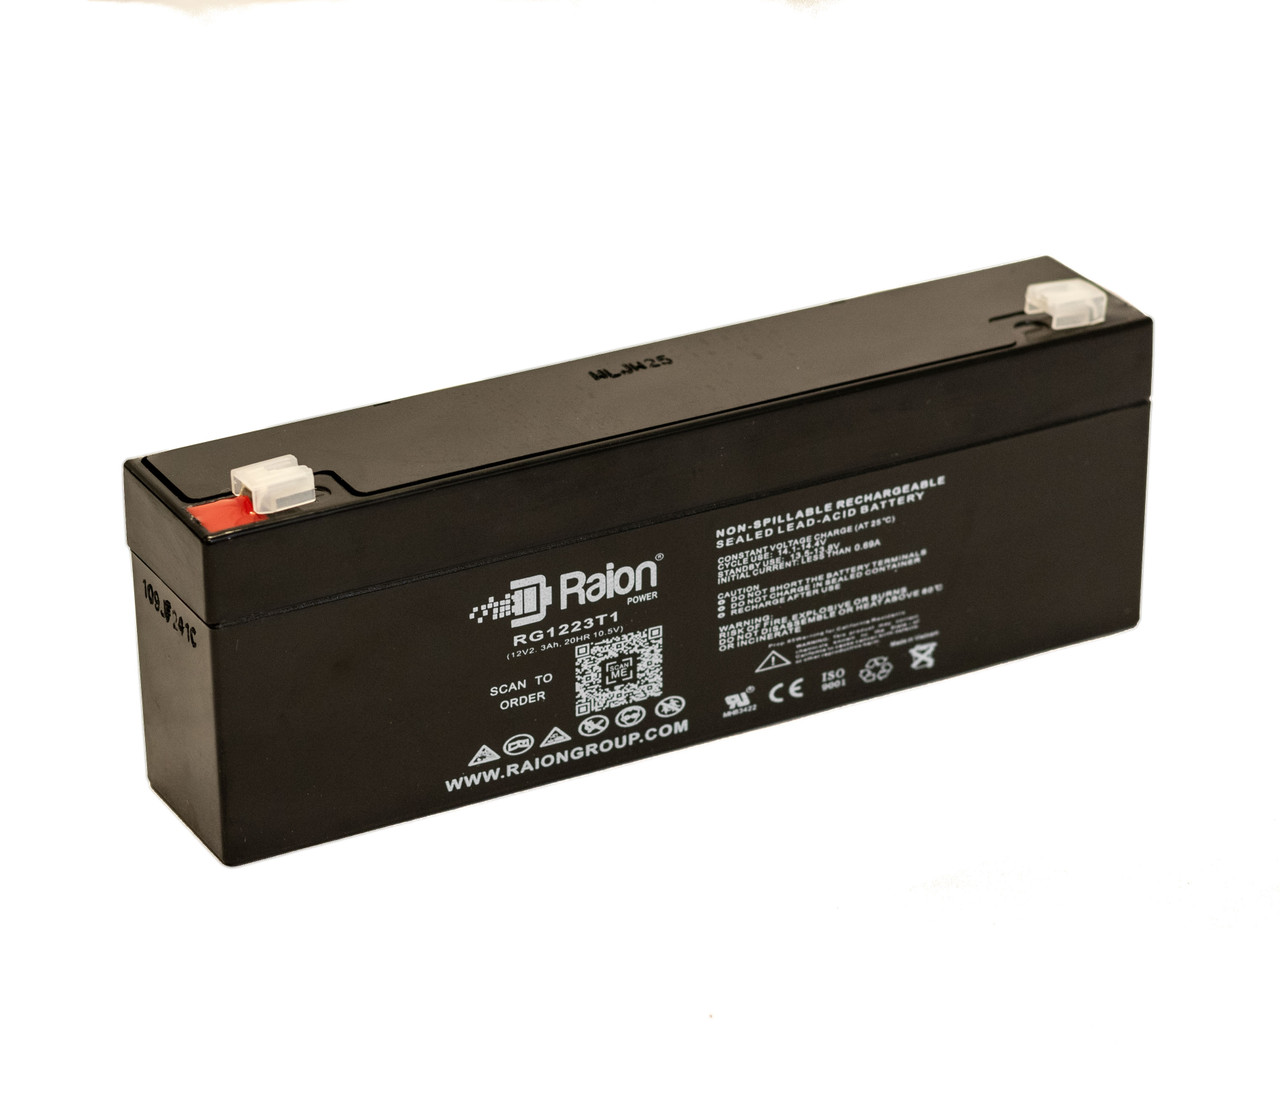 Raion Power RG1223T1 Replacement Battery for Albury Instruments Life Guard 80 Portable Defibrillator